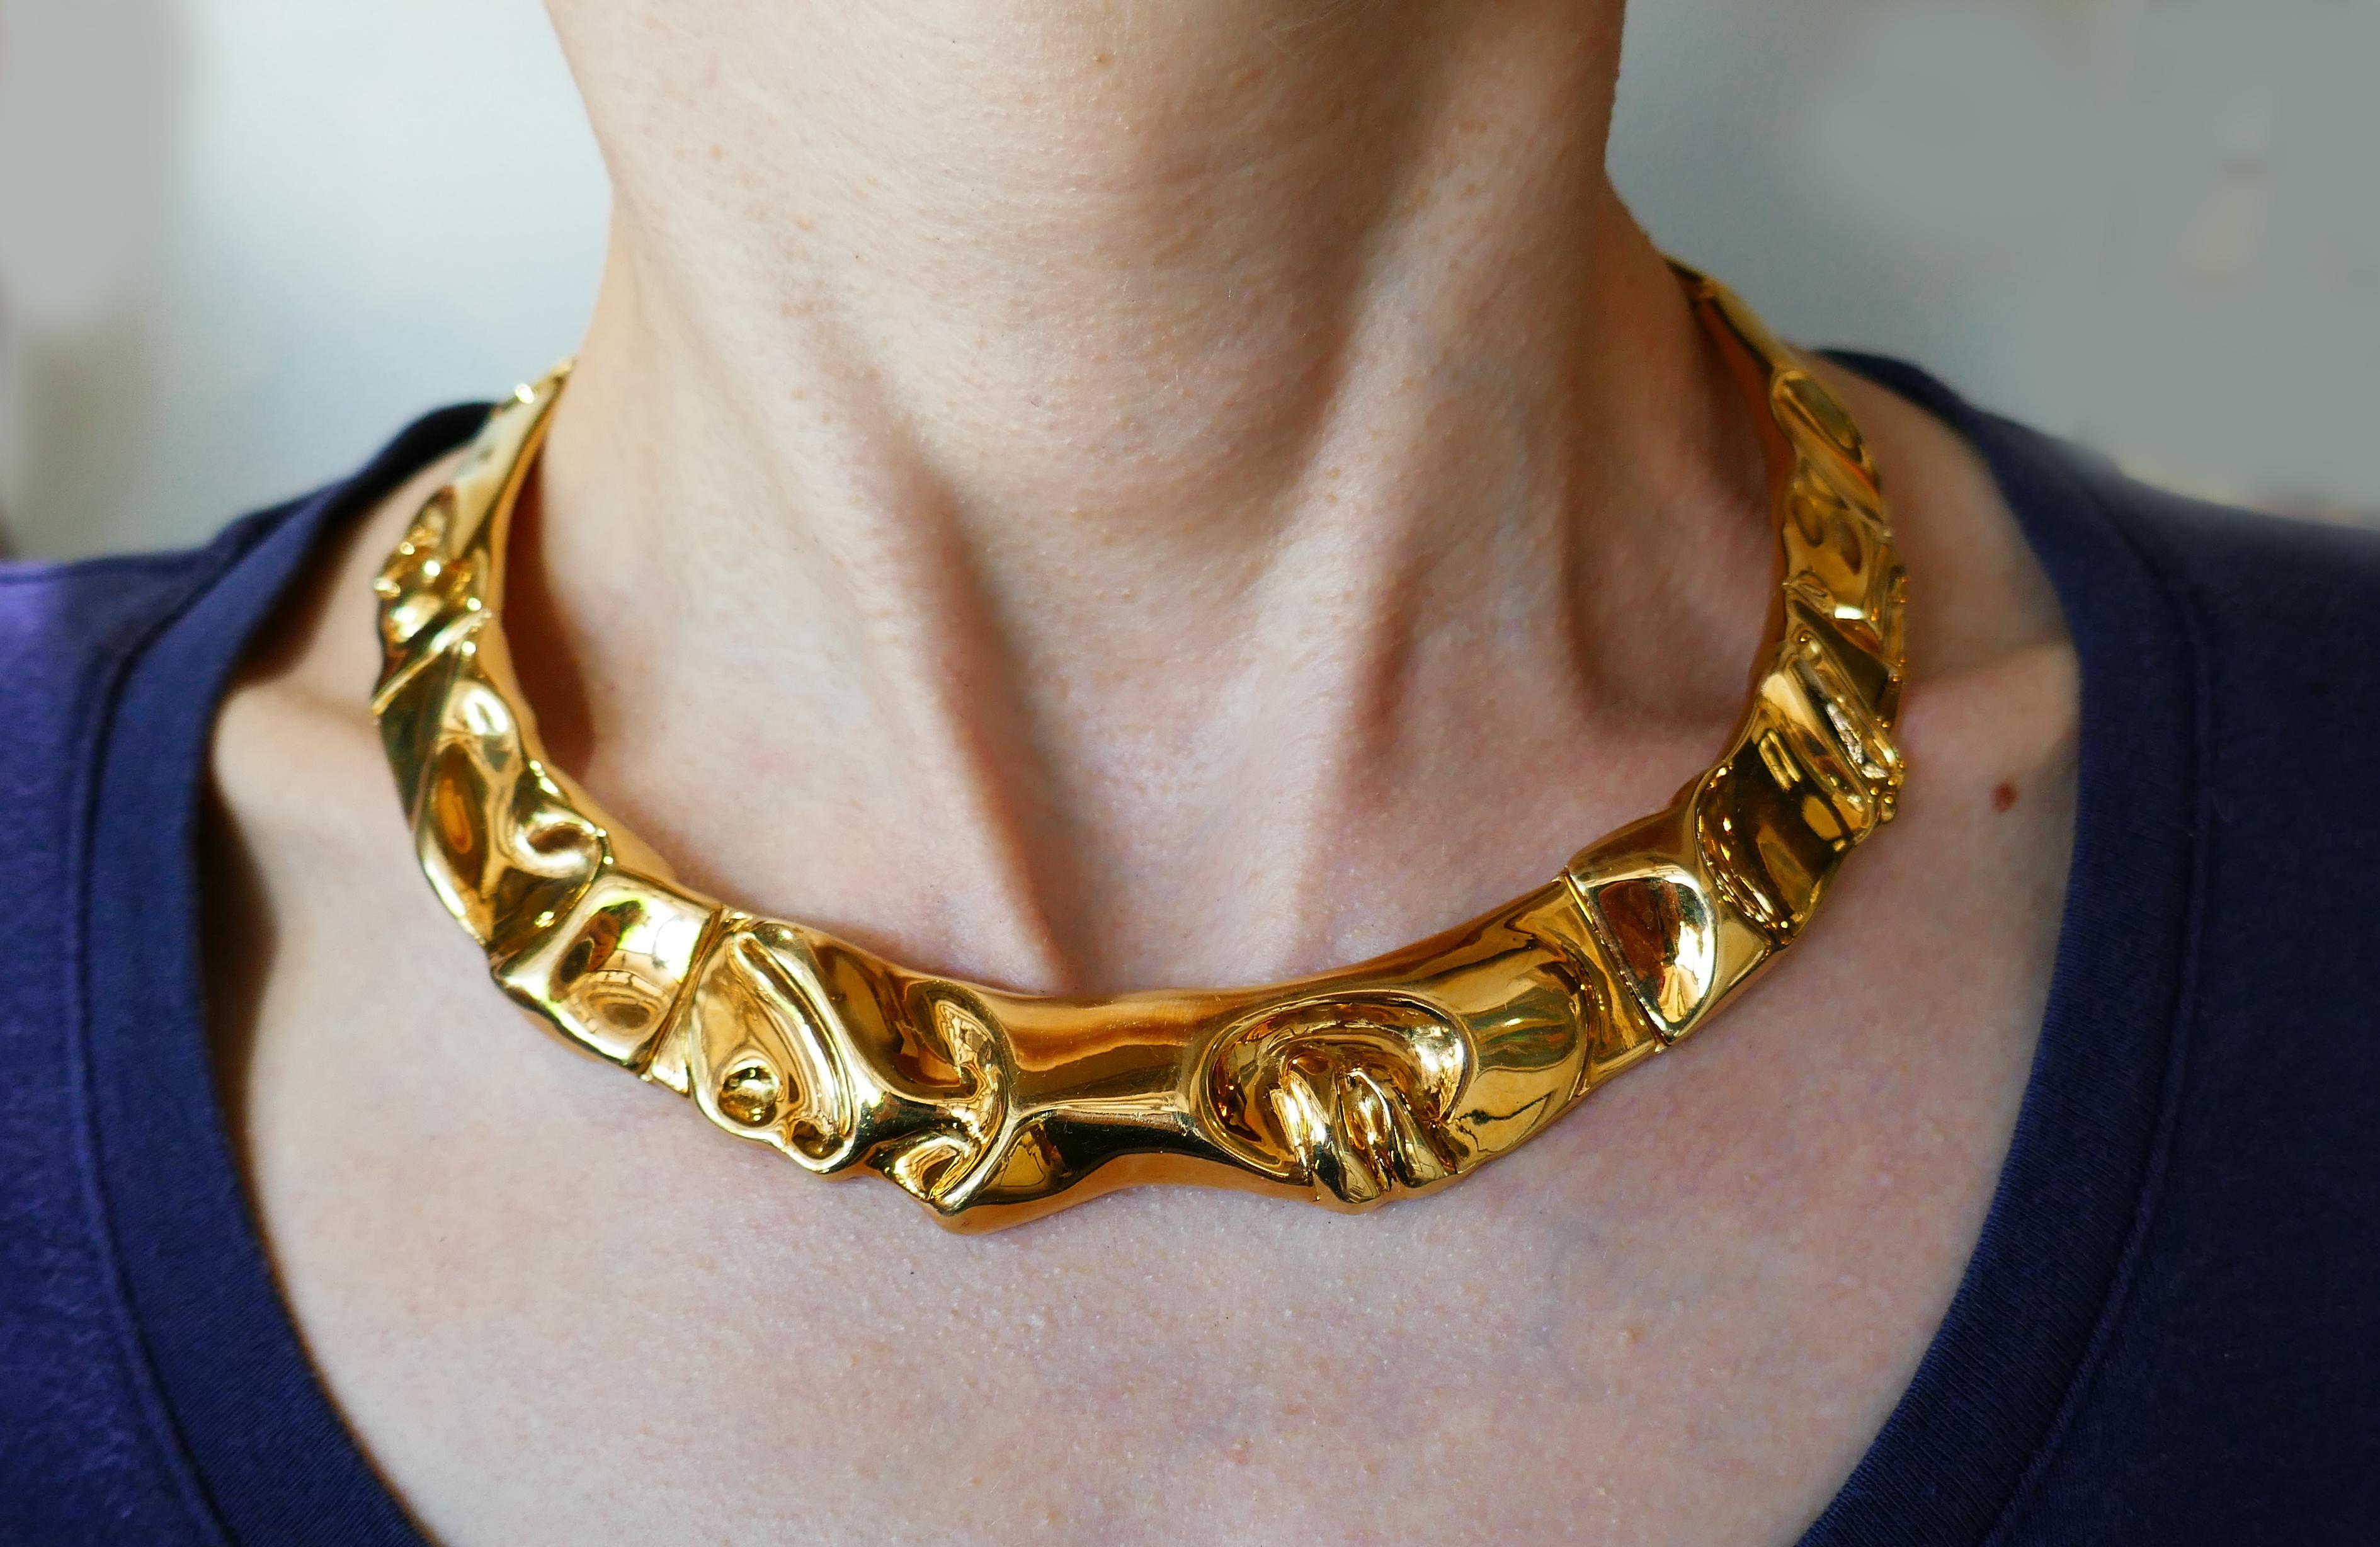 Unusual textured collar necklace created in the 1980s. Timeless and wearable, the necklace is a great addition to your jewelry collection. 
Made of 18 karat (stamped) yellow gold, the necklace is 3/4 inch (2 cm) wide in the center and graduates down